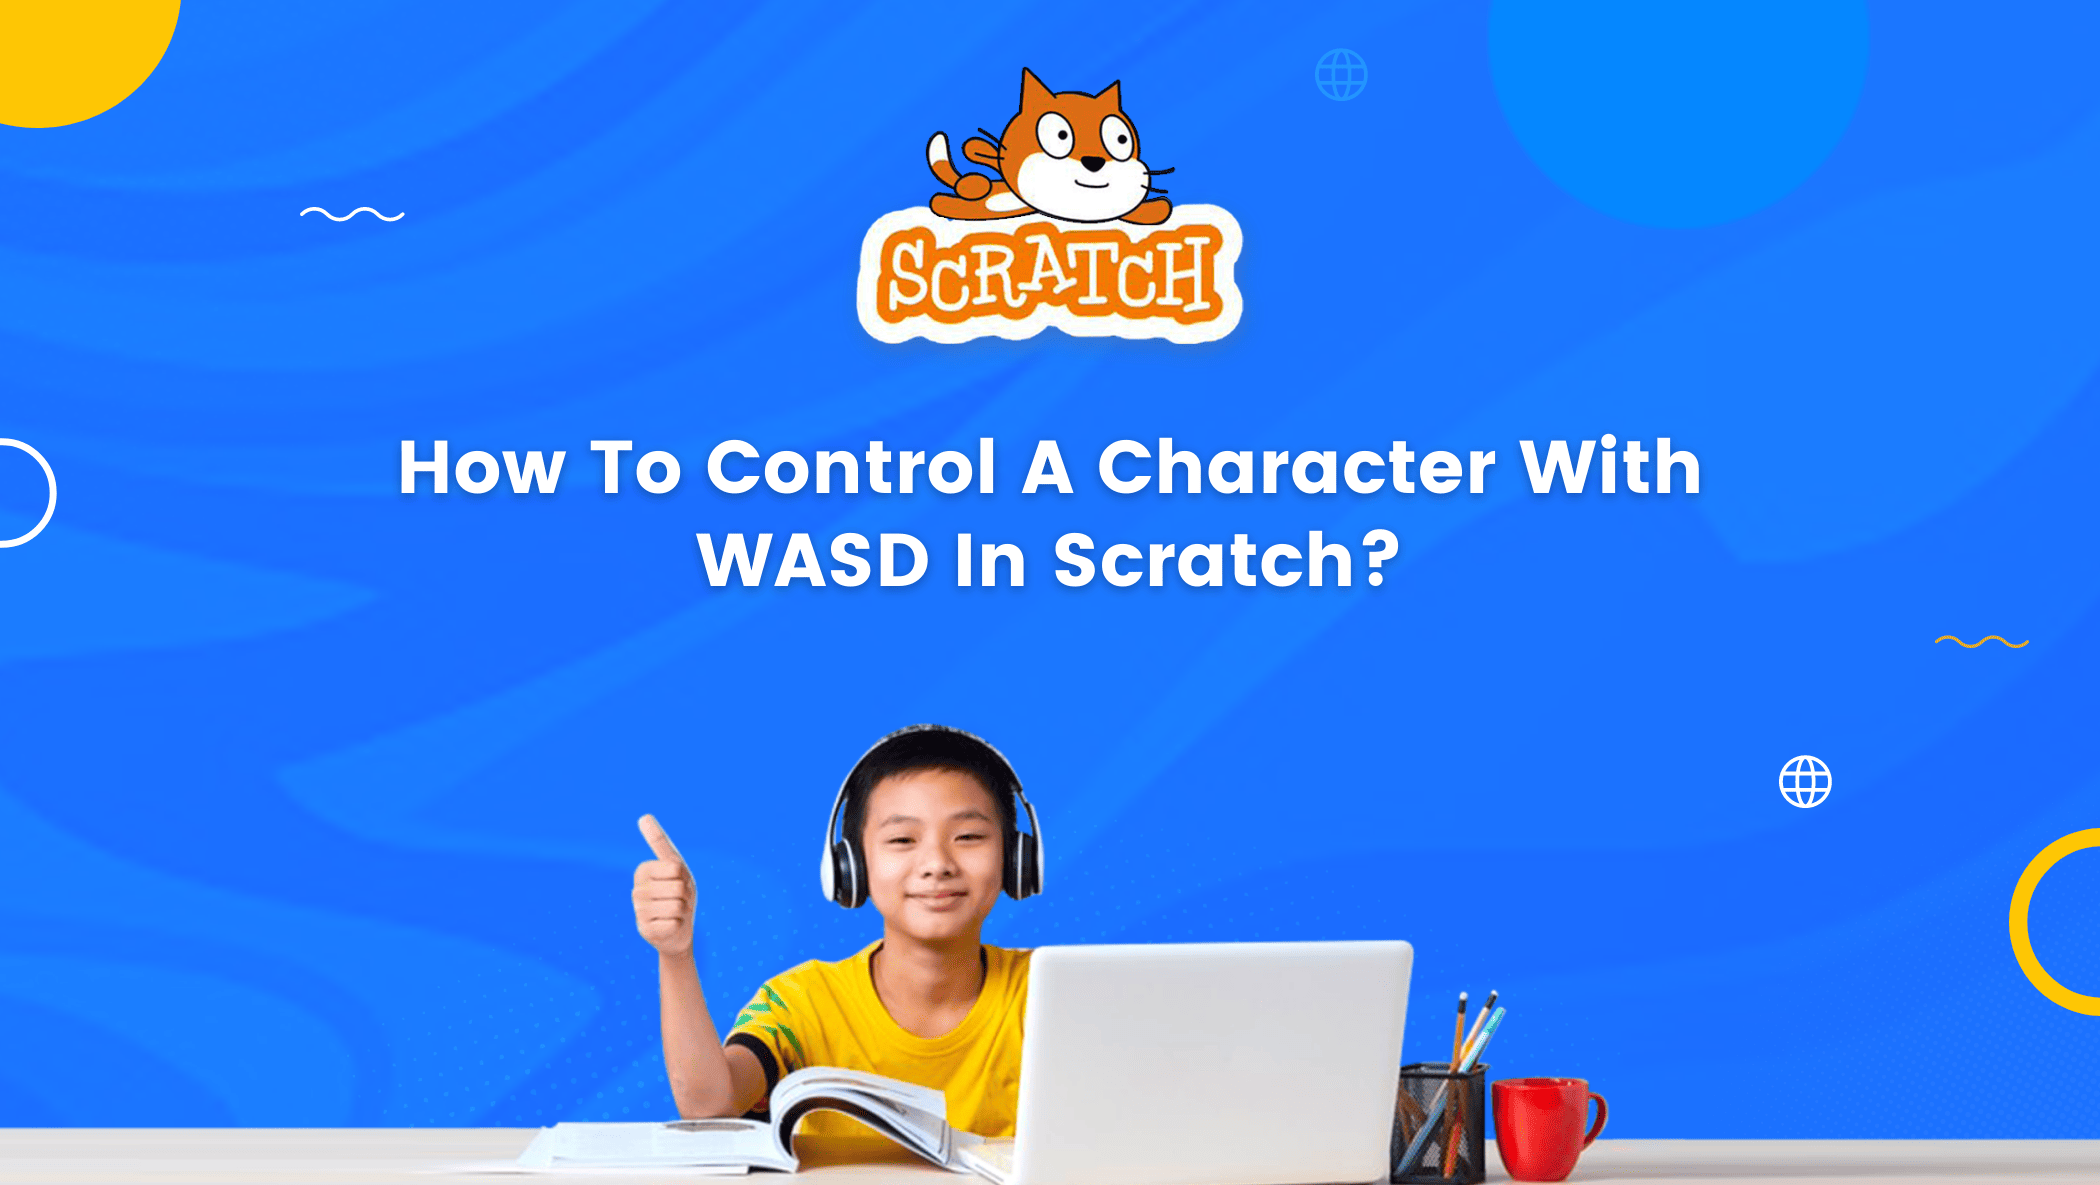 How To Control A Character With WASD In Scratch